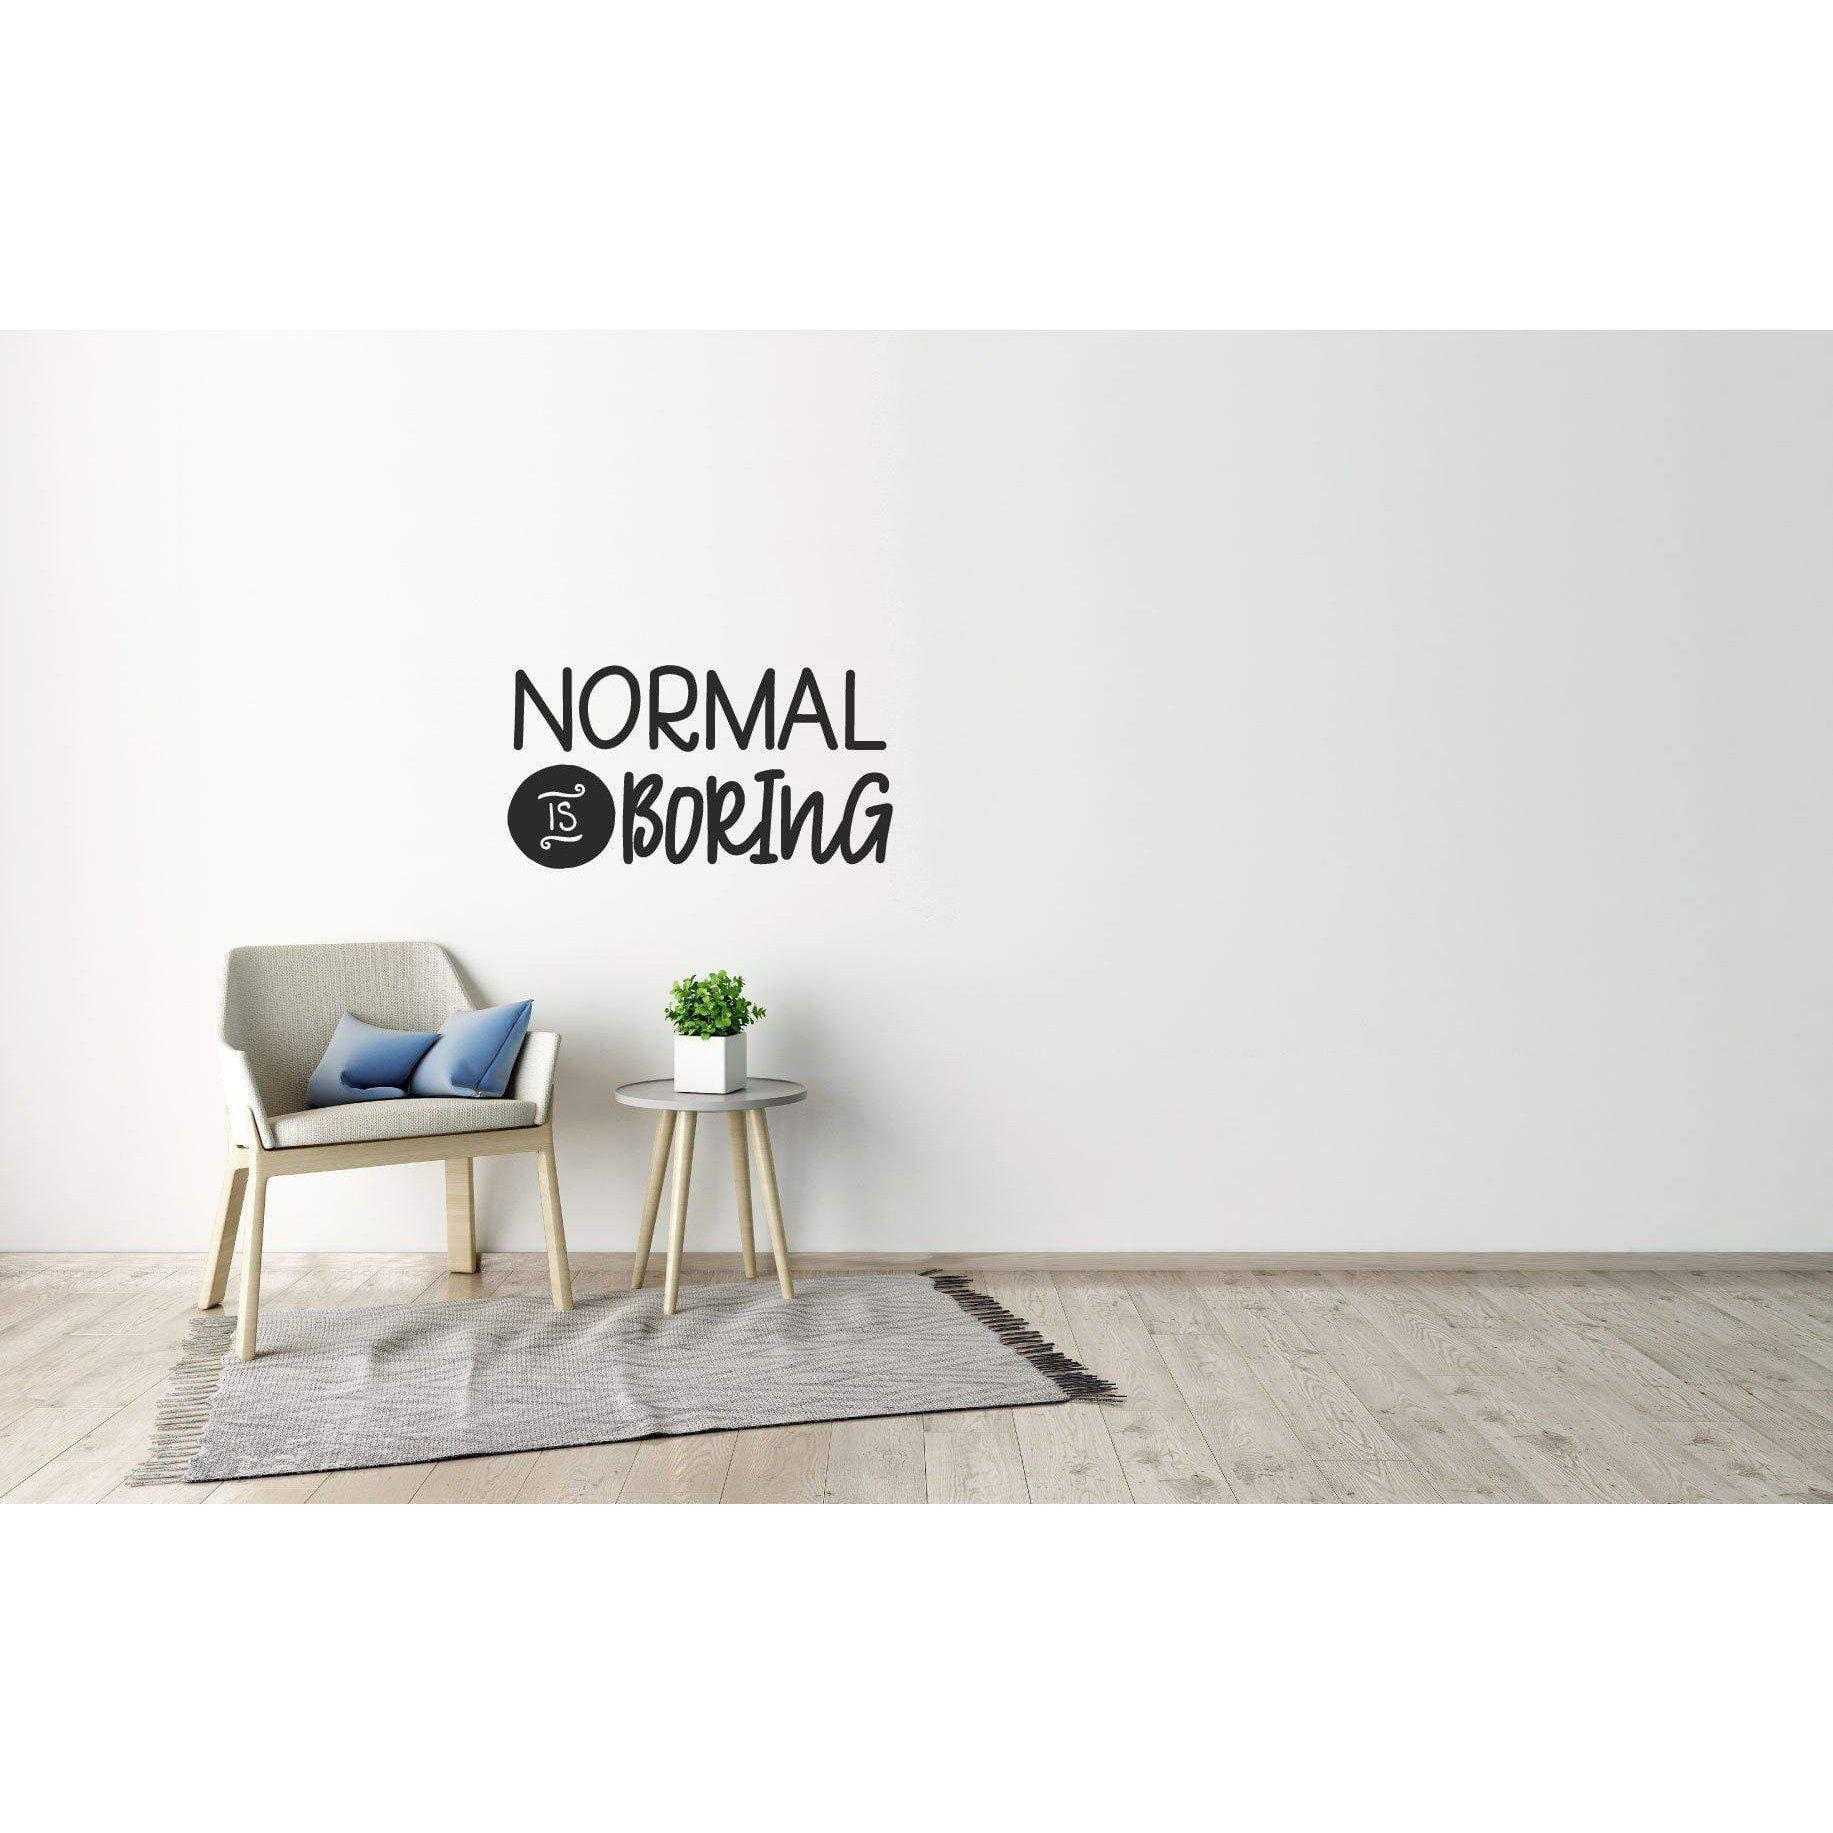 Normal Is Boring Wall Sticker Quote, Wall Decal Quote, Motivational Wall Sticker, Positive Wall Decal, Wall Art, Slogan, Home Wall Decor